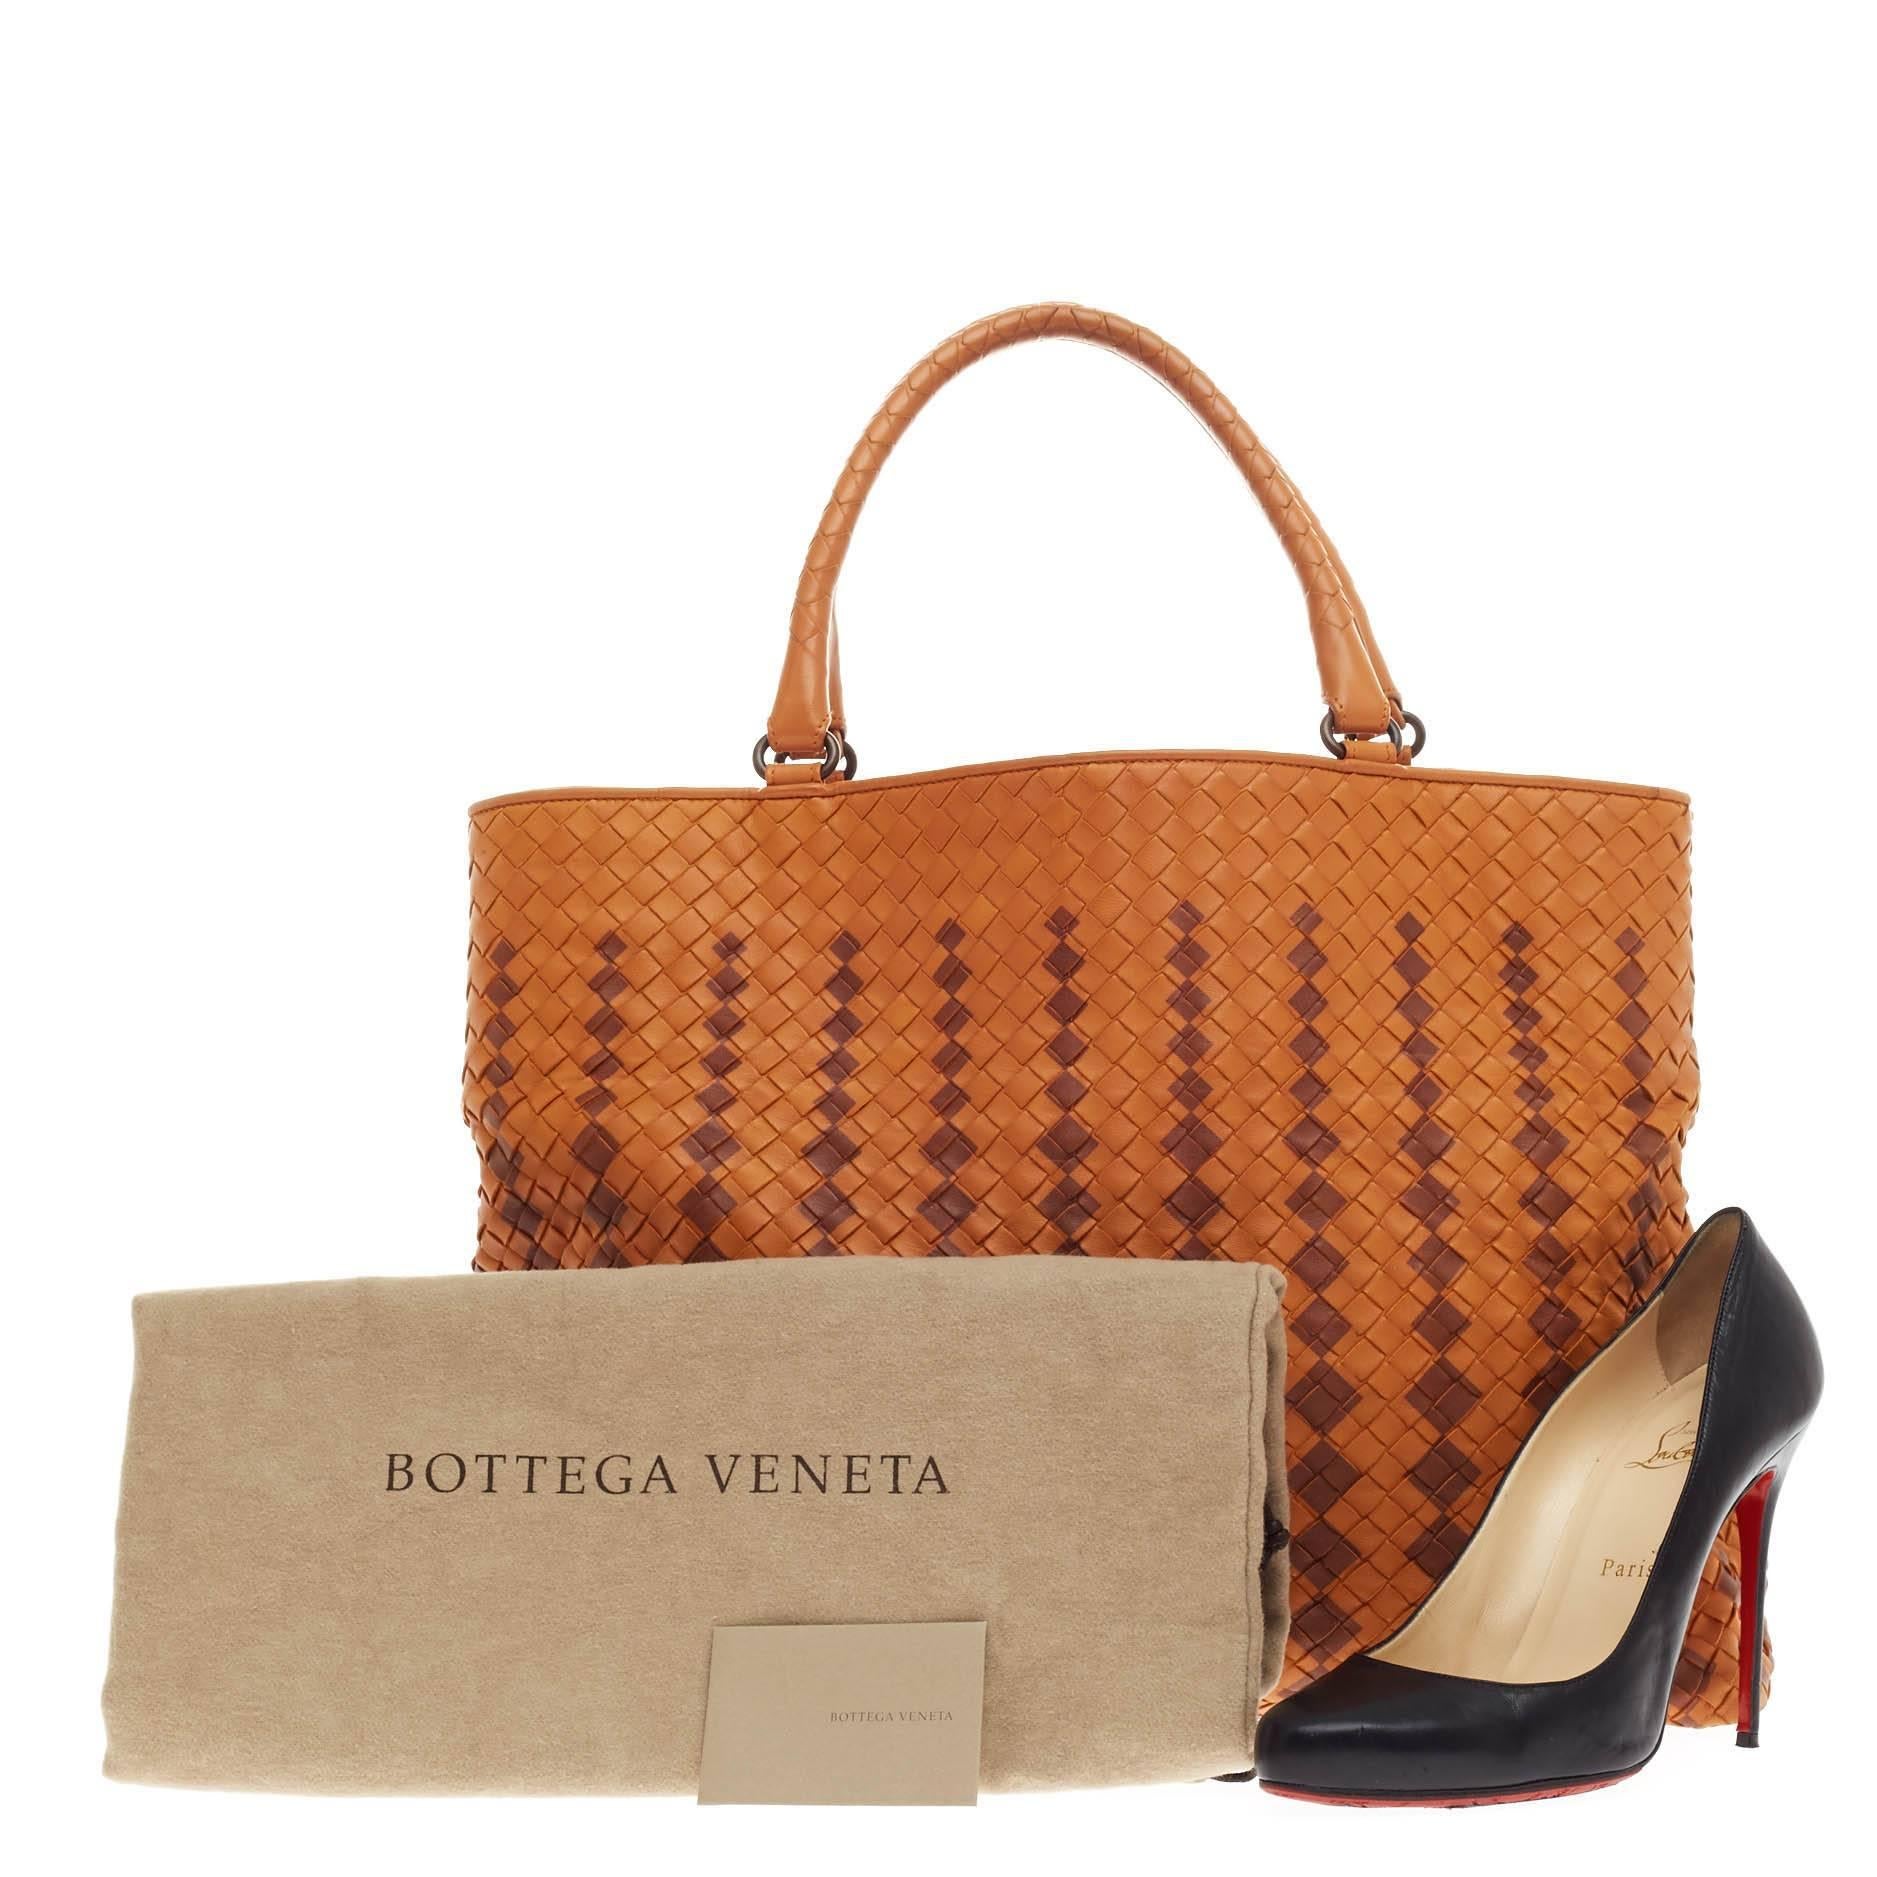 This authentic Bottega Veneta Braided Open Tote Intrecciato Nappa Large presented in the brand's 20087 Collection is an oversized timelessly elegant tote with a casual silhouette. Constructed from orange nappa leather woven in Bottega Veneta's